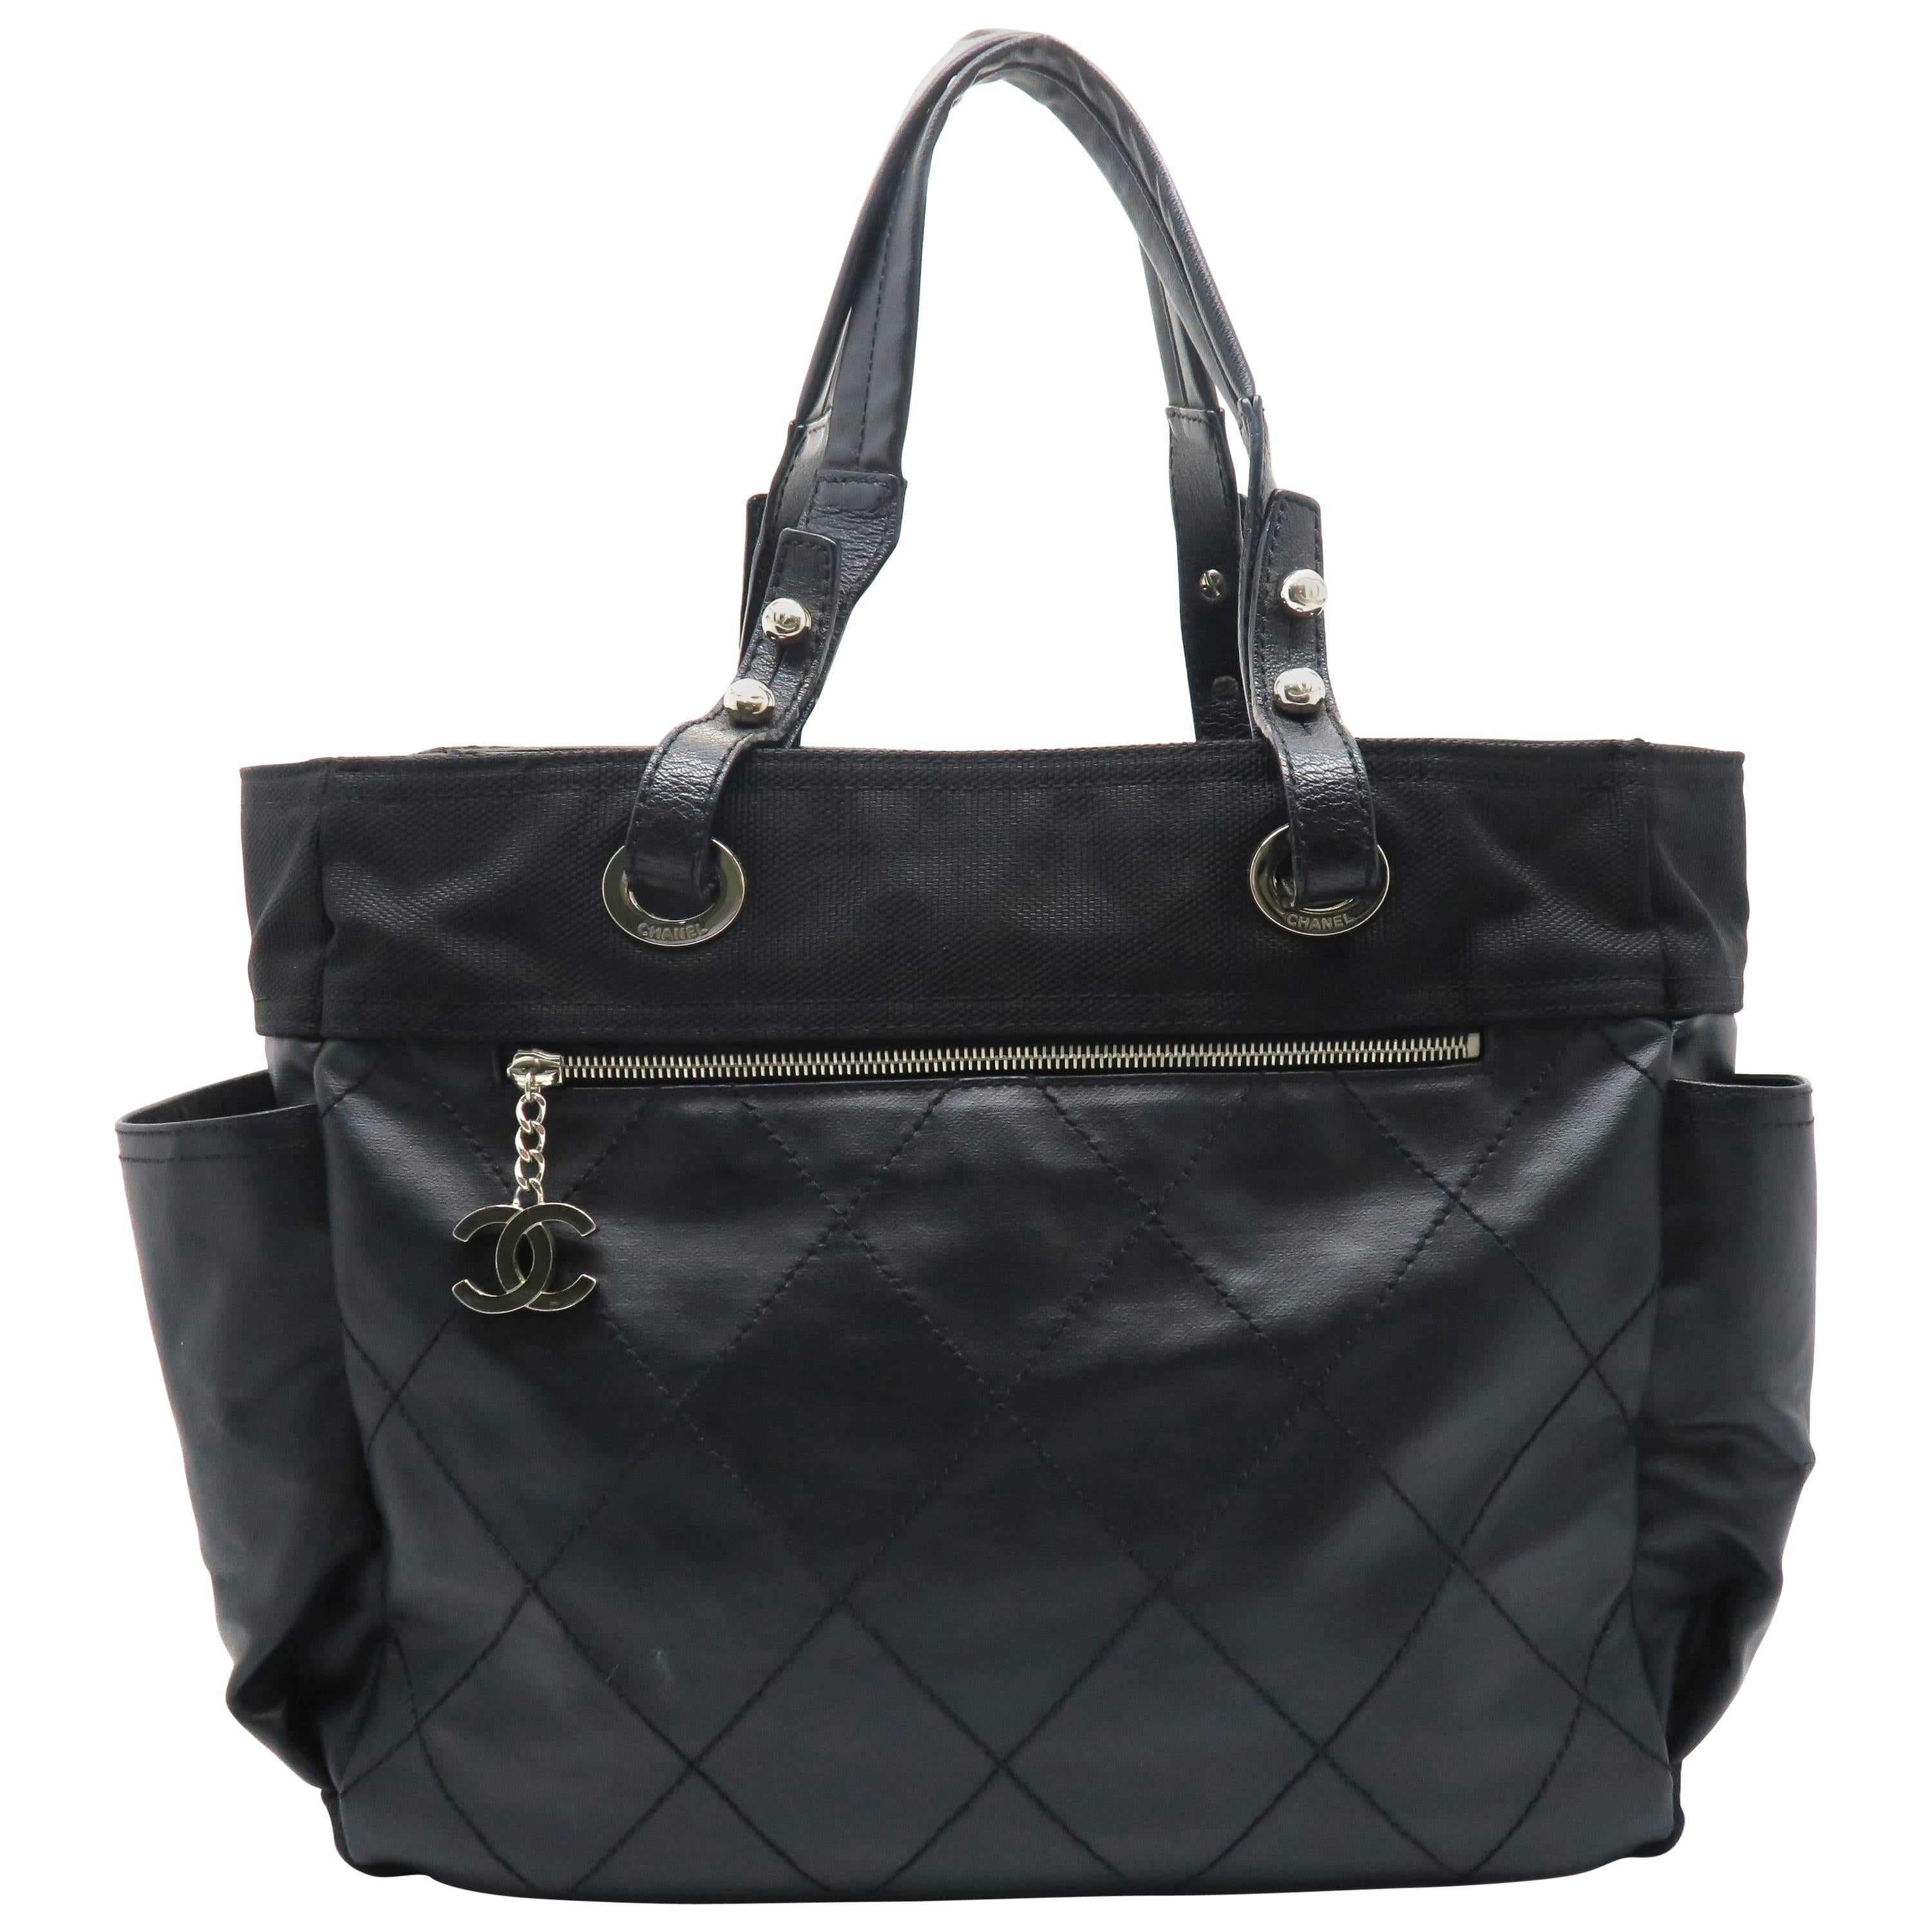 Chanel Black Coated Canvas Tote Bag For Sale